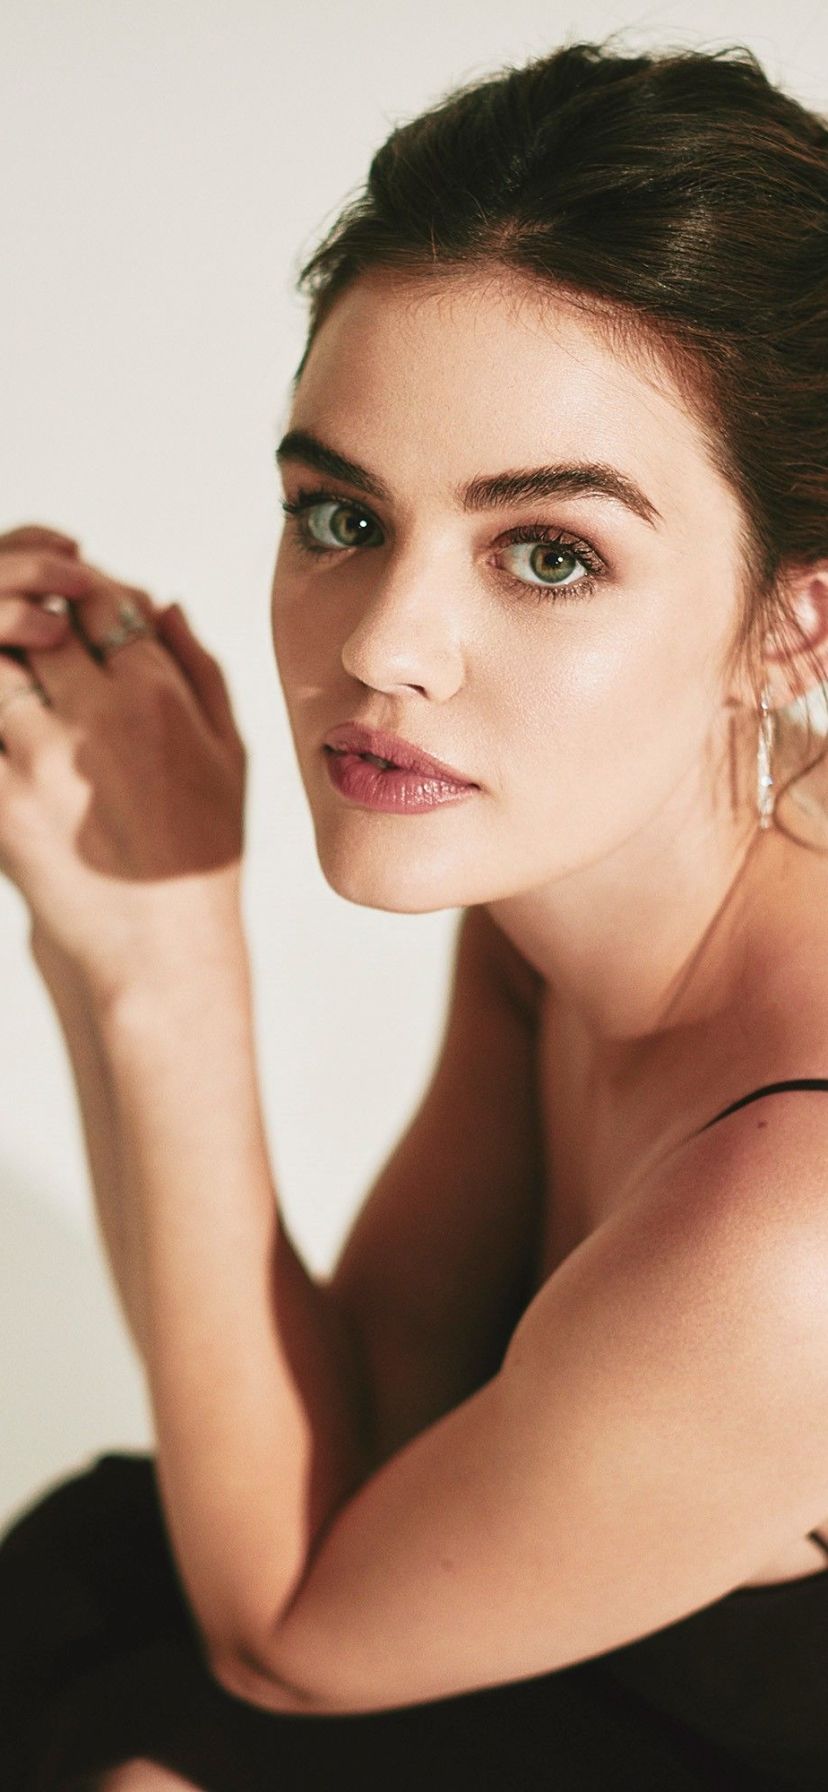 Lucy Hale Mobile Wallpaper. Lucy hale, Hale, Lucy